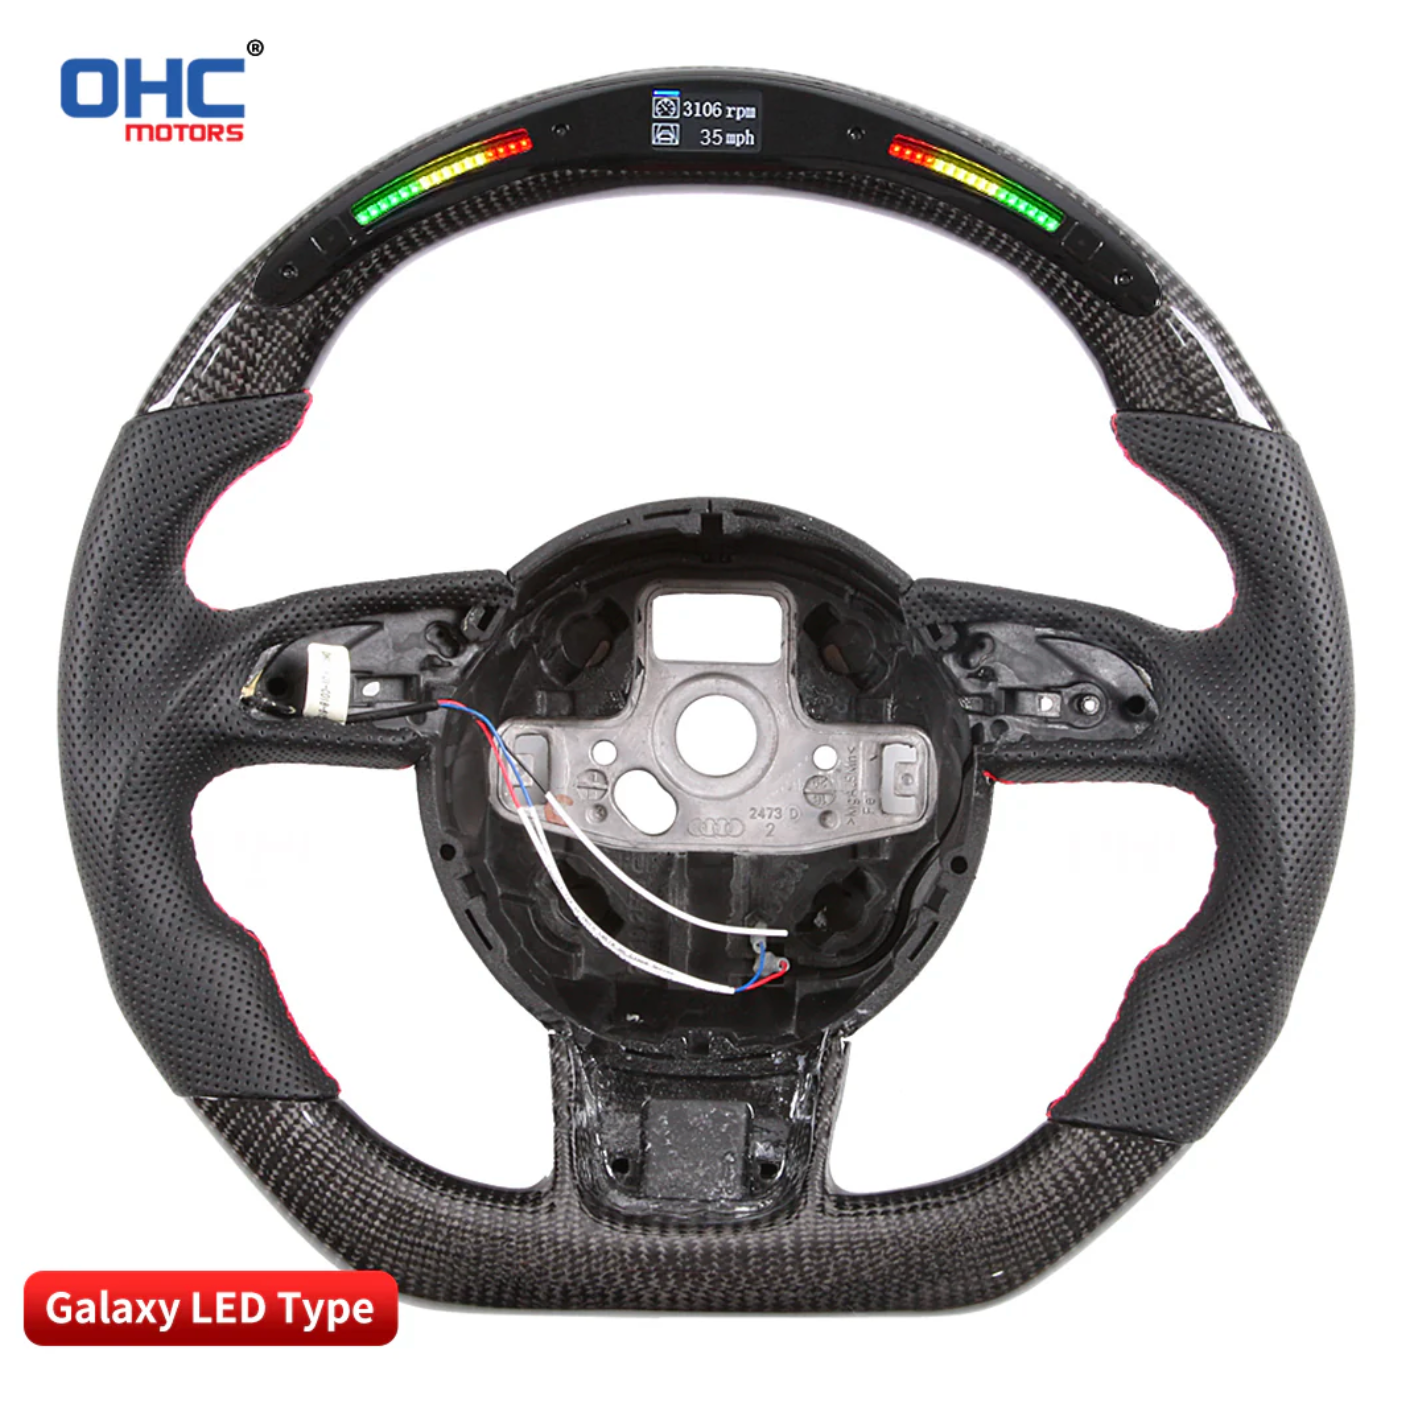 Audi A1 & S1 Carbon Fibre & Galaxy LED Steering Wheel by OHC (2014-2018), Steering Wheels, OHC - AUTOID | Premium Automotive Accessories